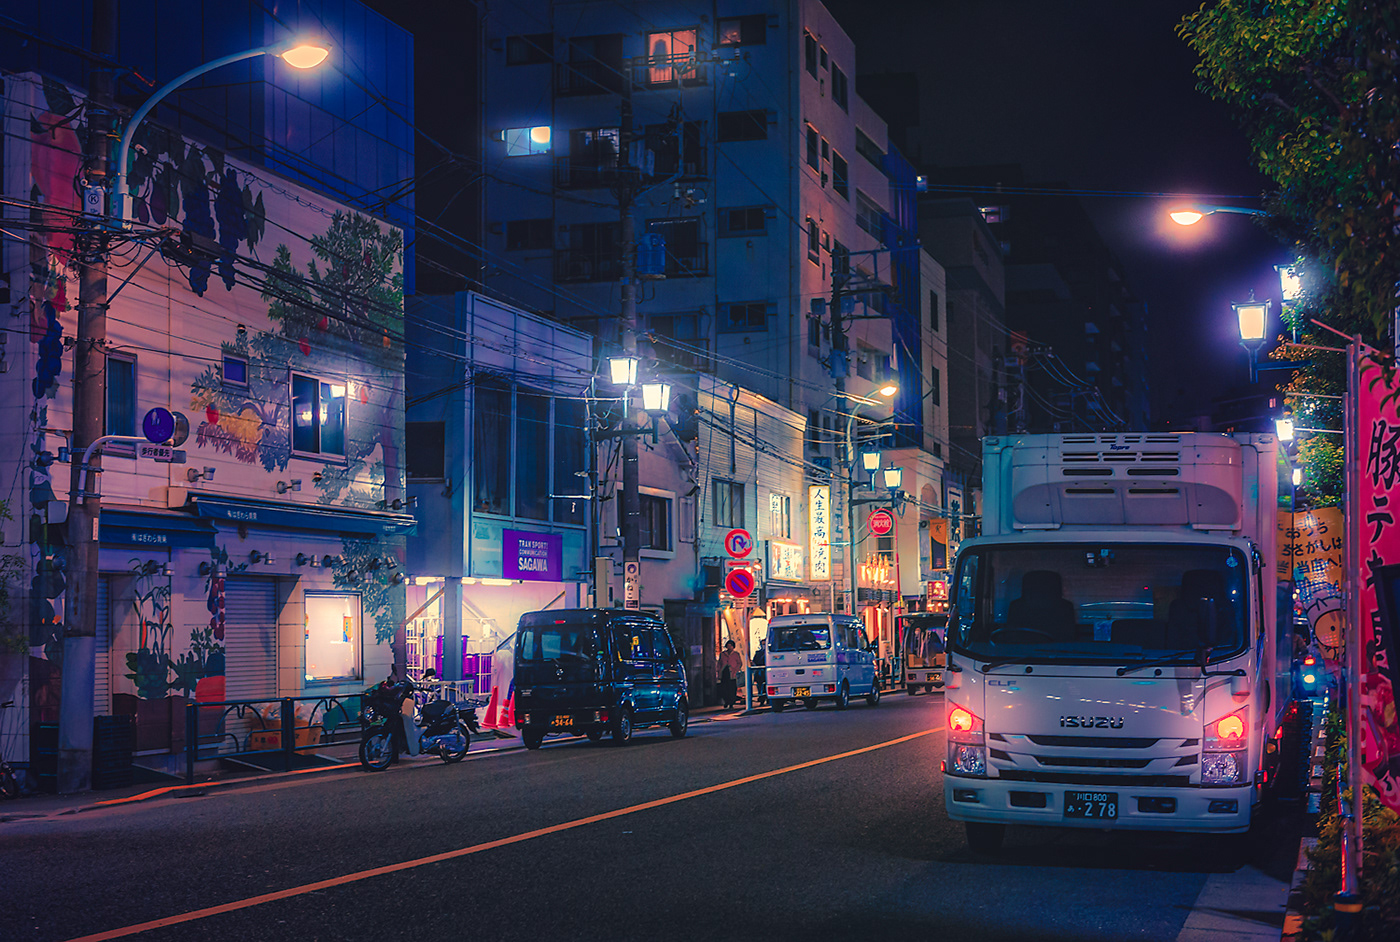 Anthony presley colorful culture japan Moody night Photography  Street tokyo Travel